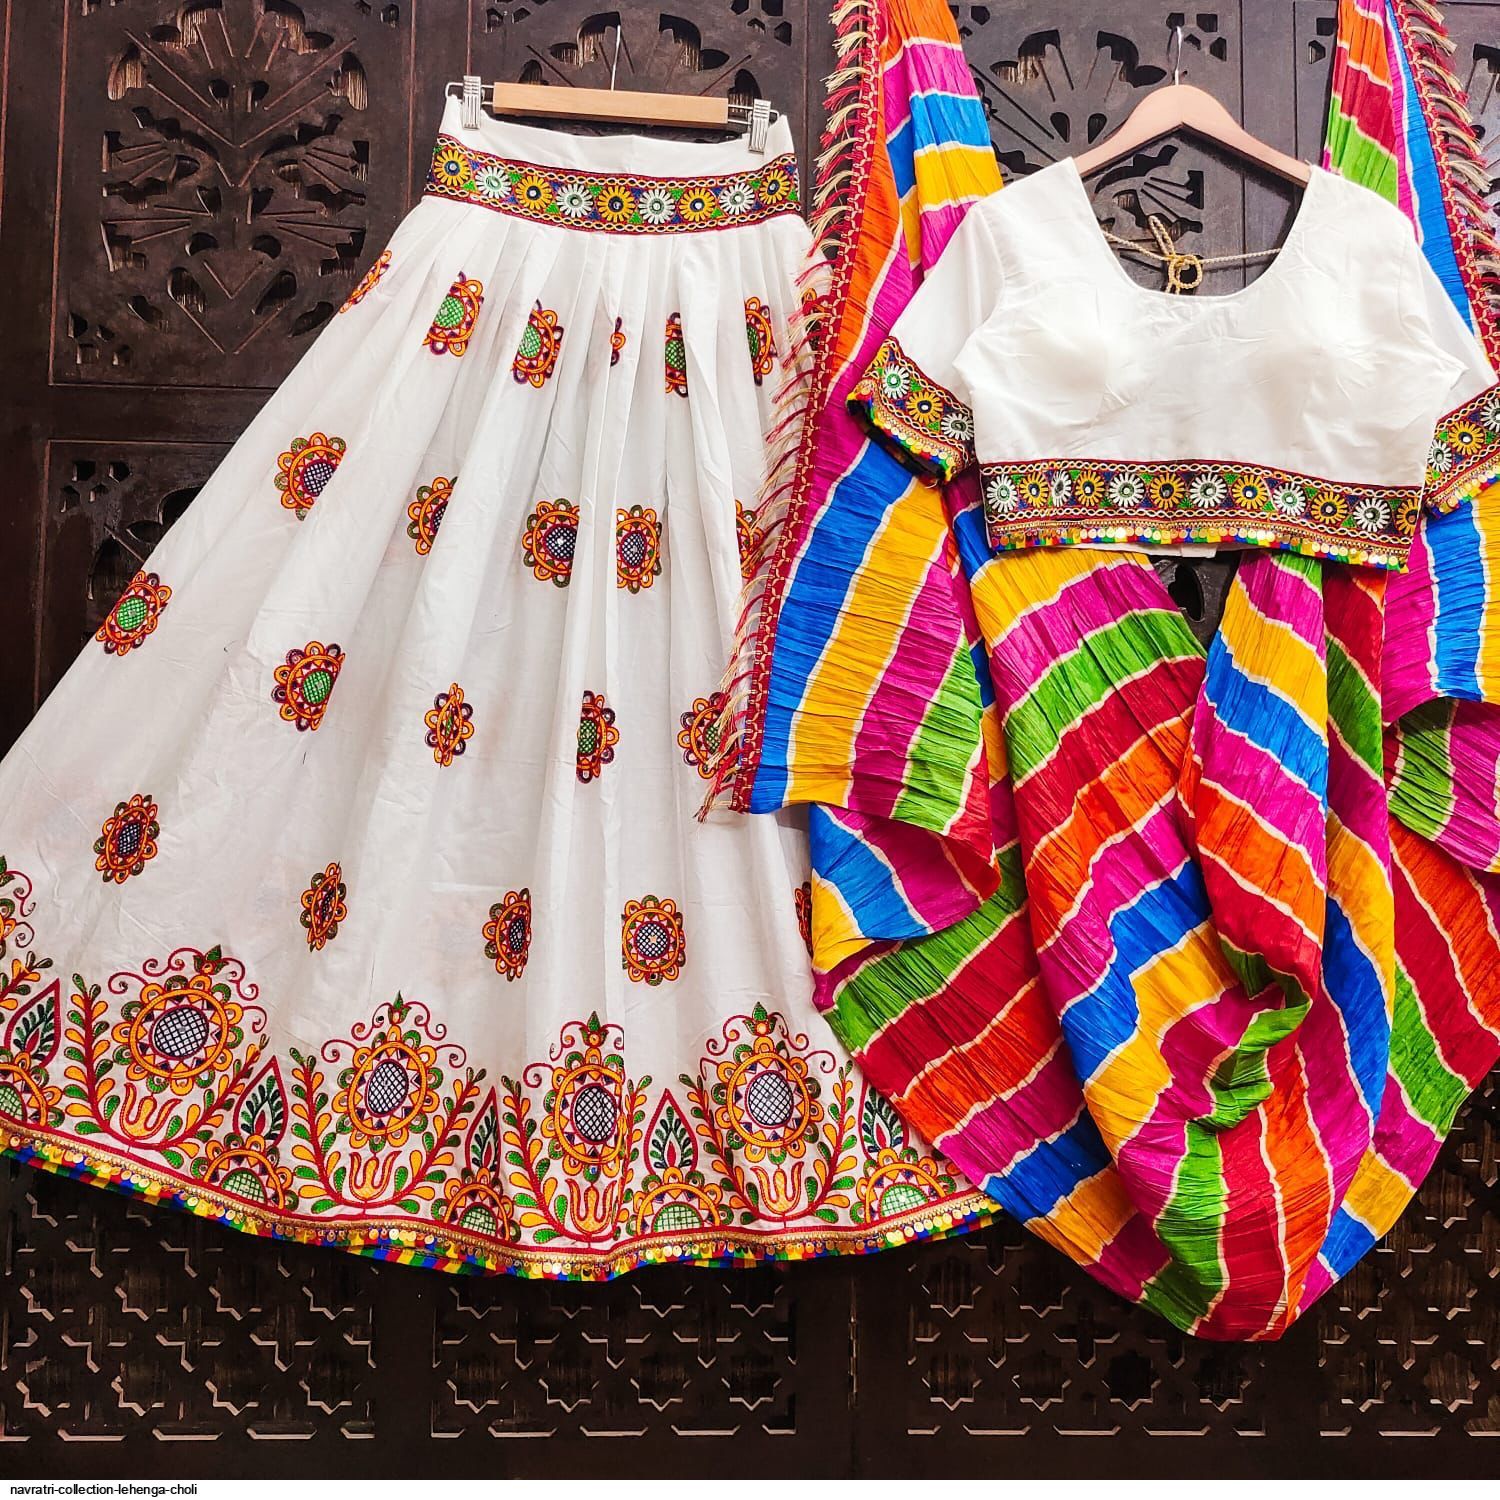 Stunning Bridal Lehengas for Your Engagement